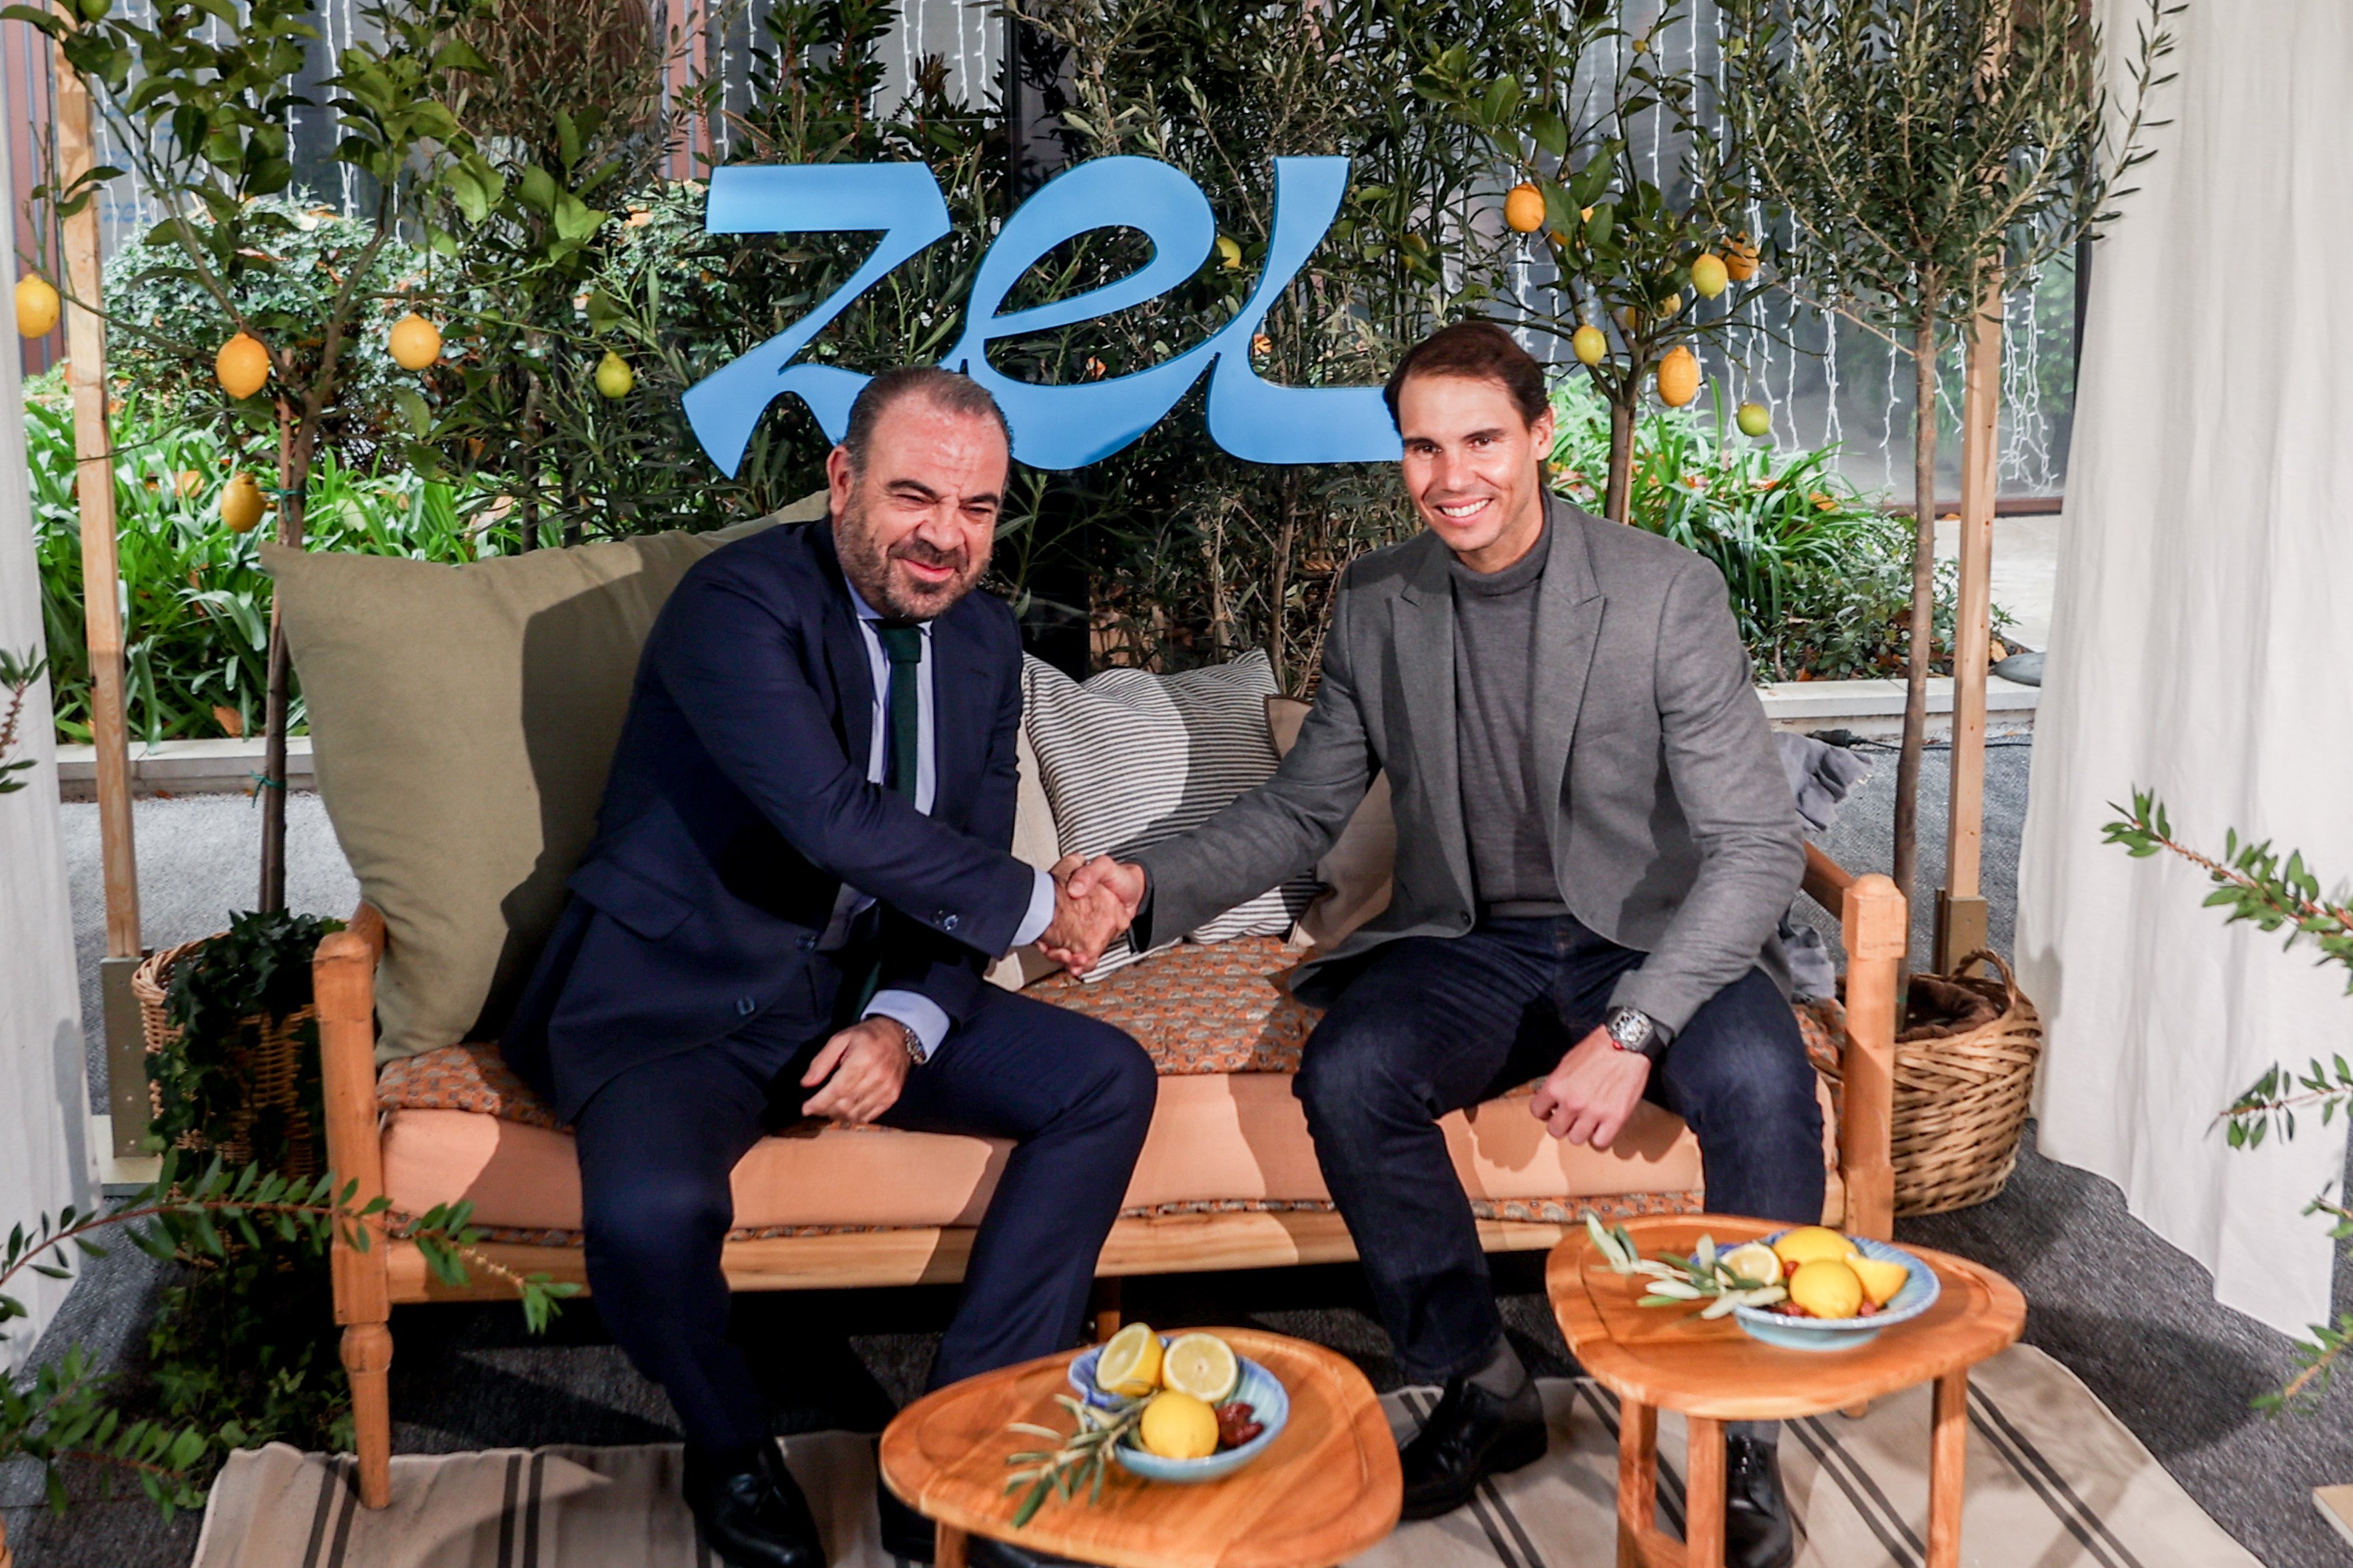 Melia Hotels International chief executive Gabriel Escarrer and tennis player Rafa Nadal shake hands at the launch of Zel, a new hotel chain, in December 2022. It is the latest example of a sports, musical or screen star lending their name to a tourism business. Photo: Getty Images